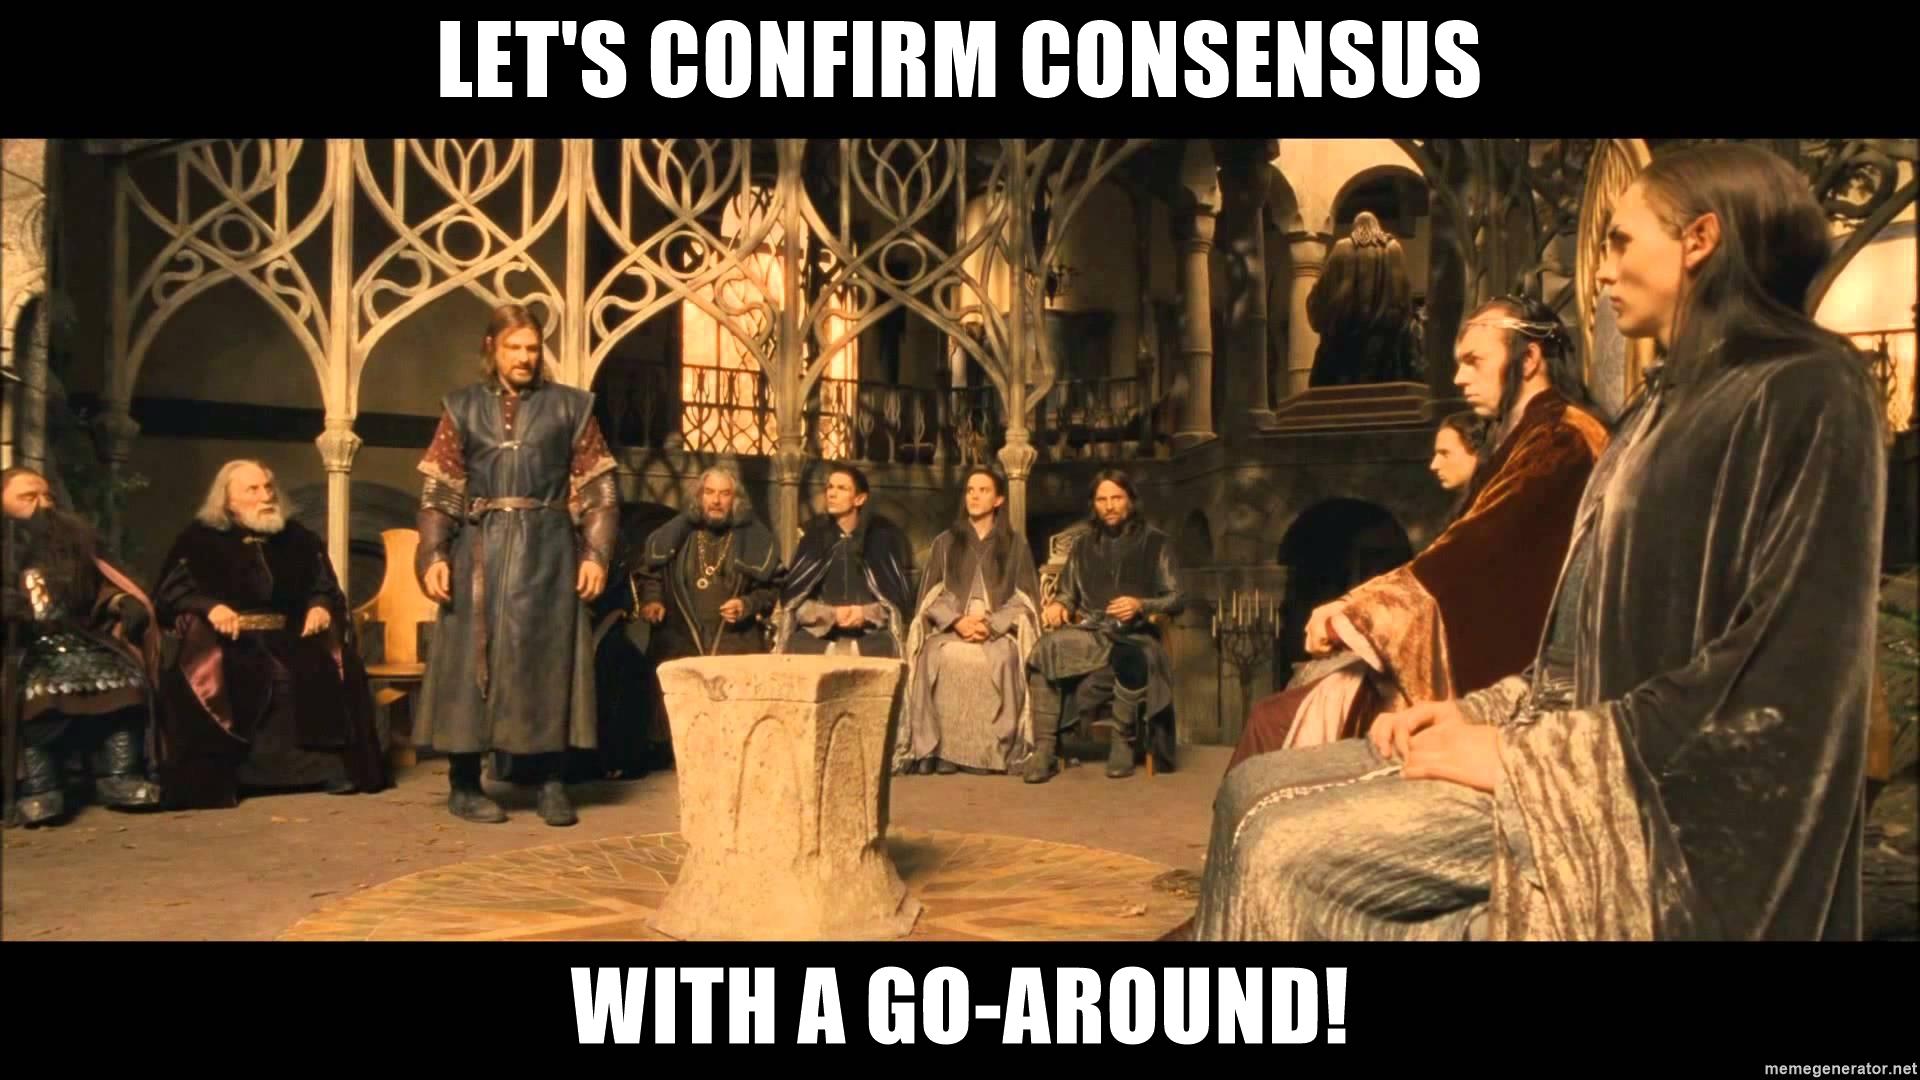 The Council of Elrond confirms decisions with a go-around